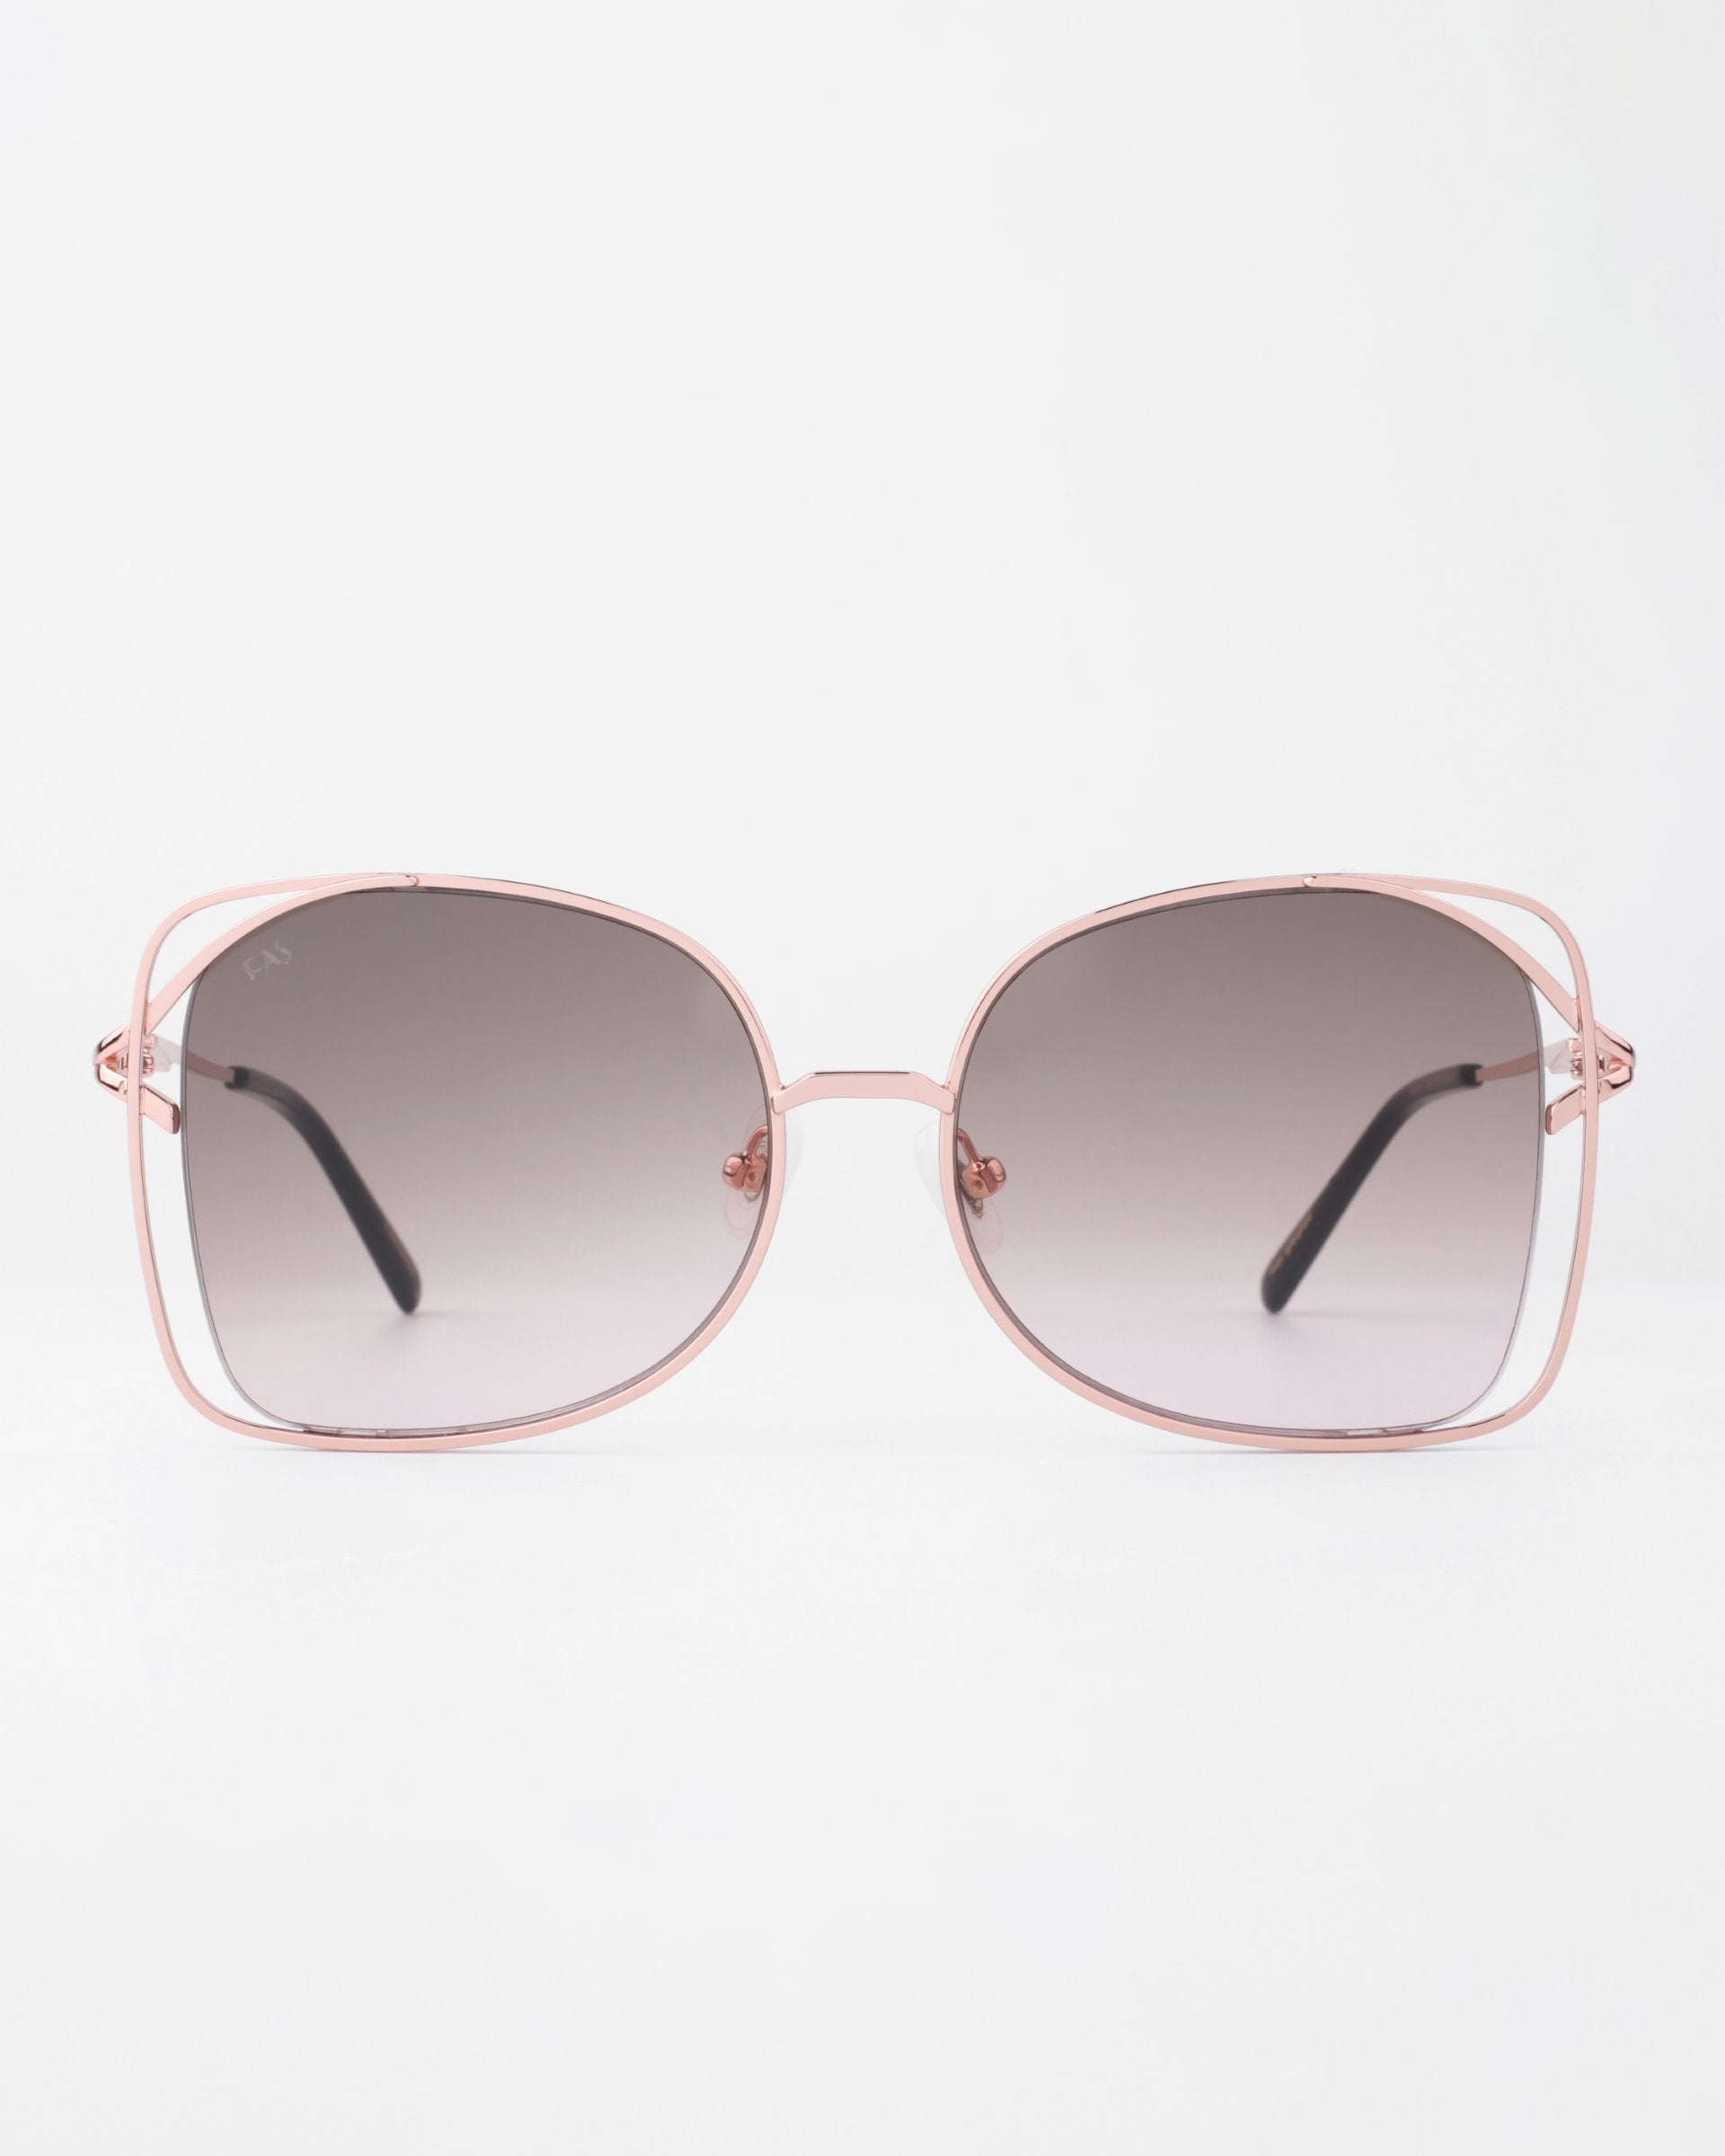 A pair of handmade, large, square-shaped Carousel sunglasses by For Art's Sake® with a thin, pink metal frame and gradient dark to light lenses. Crafted with gold-plated stainless steel for durability and style, they offer full UVA & UVB protection. The glasses are displayed against a plain white background with the temples extended outward.